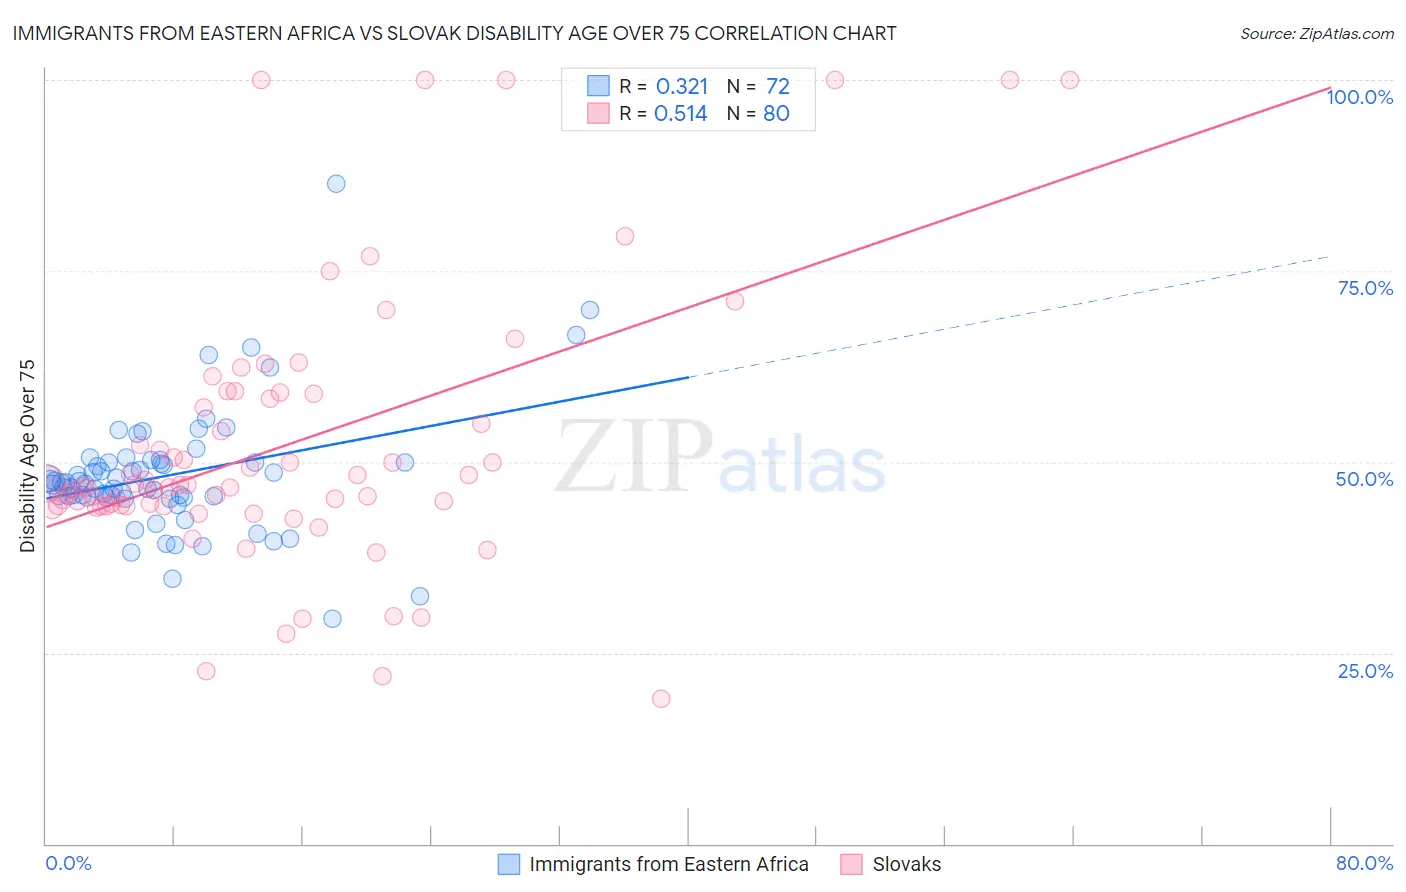 Immigrants from Eastern Africa vs Slovak Disability Age Over 75